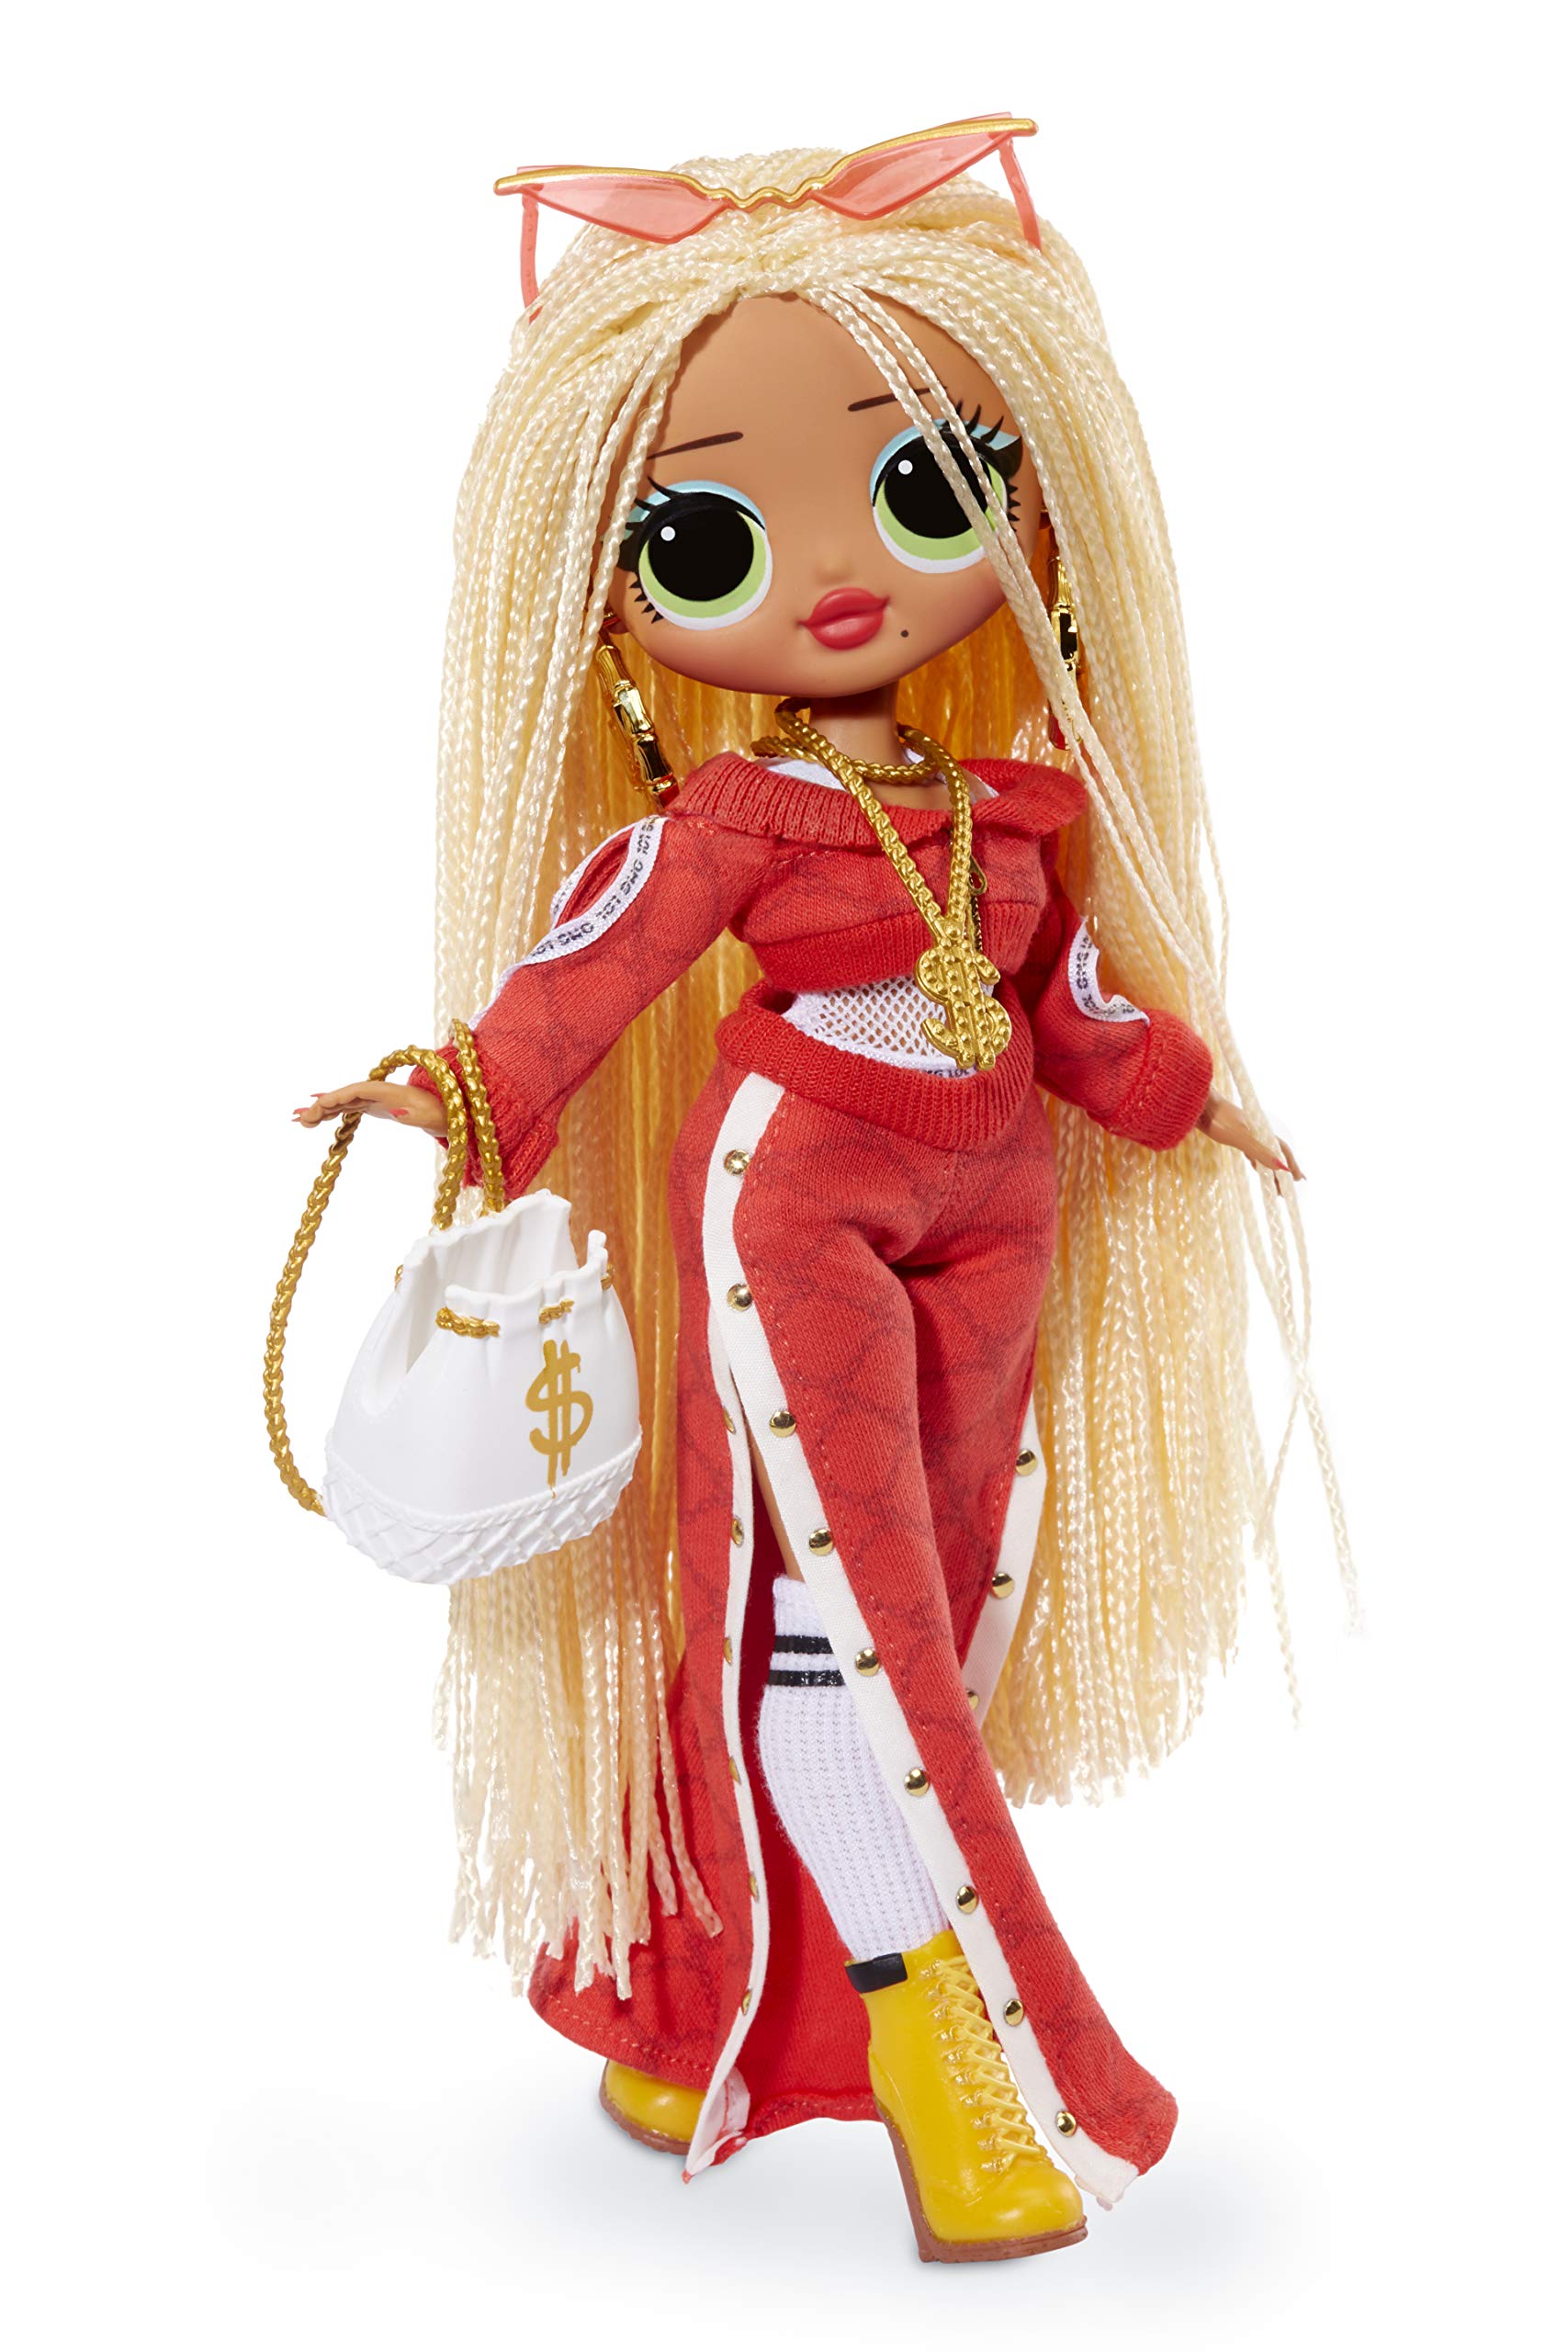 Where to buy new LOL Surprise OMG fashion dolls? We know the answer